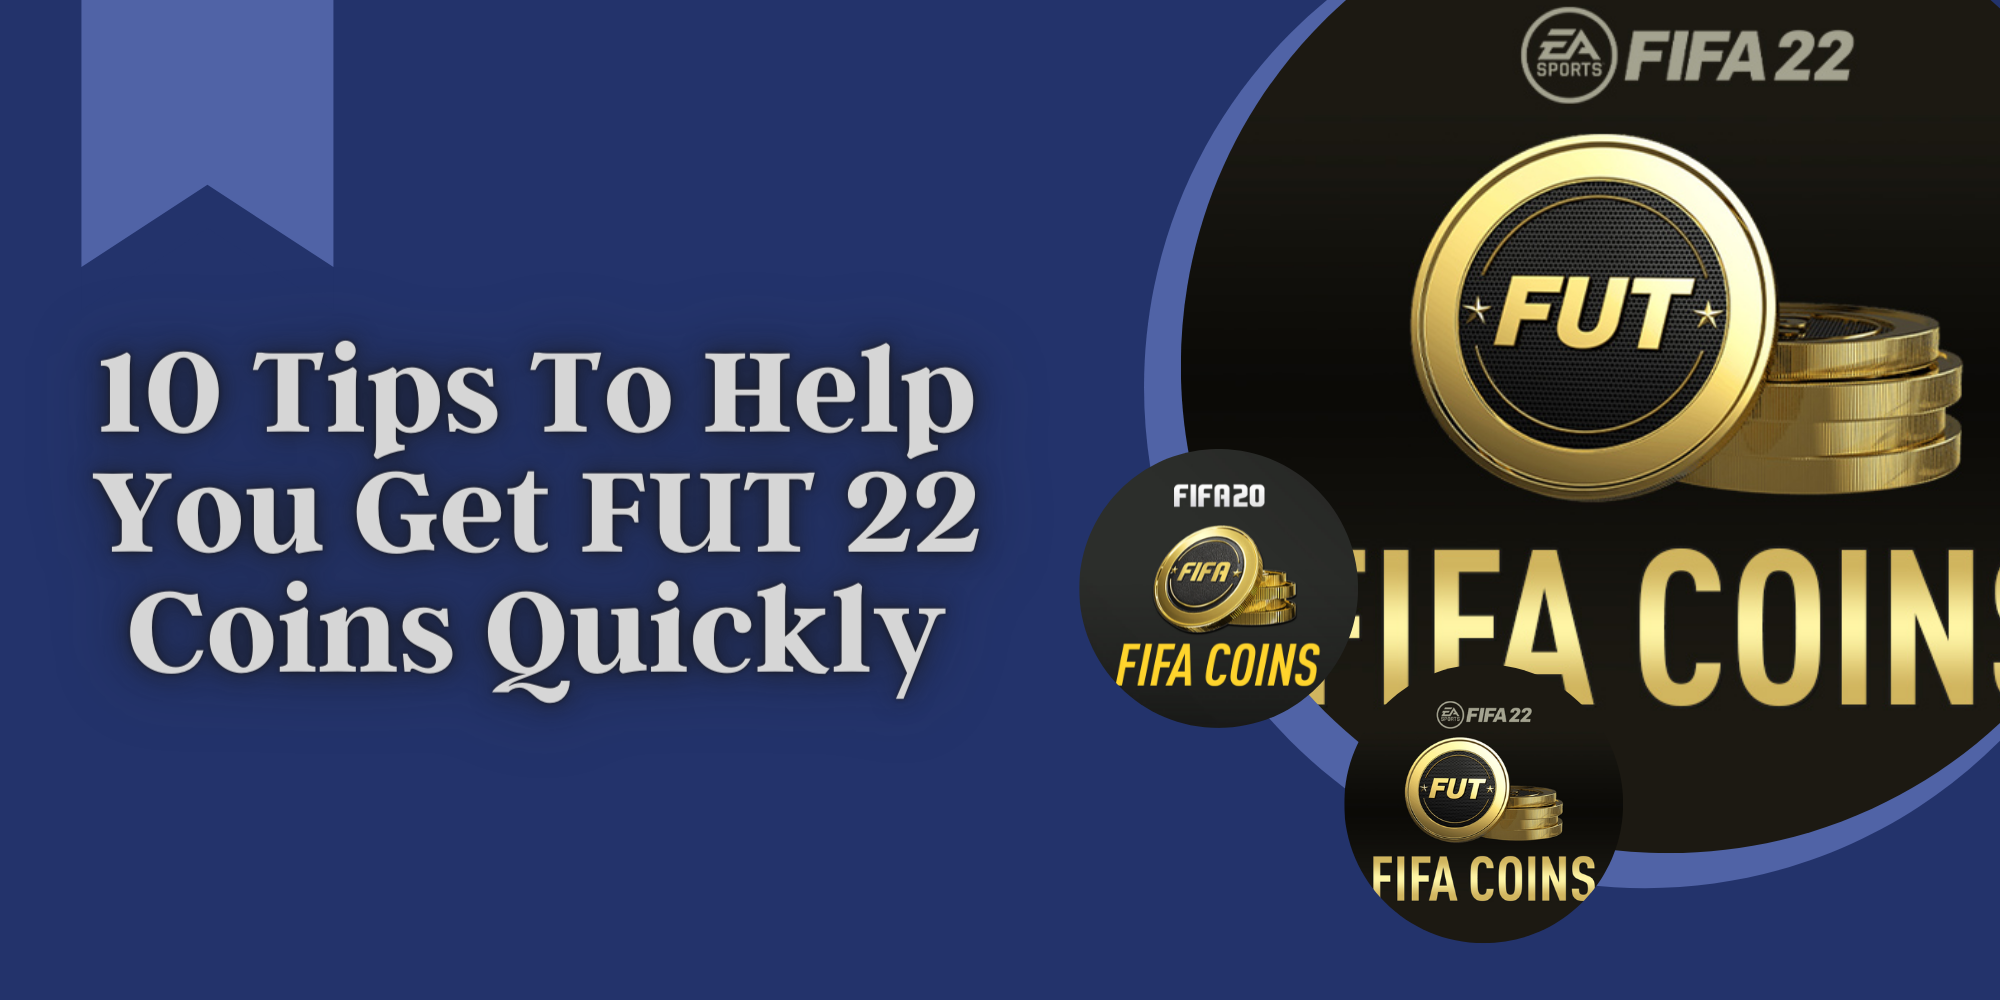 Ten Useful Precise Tips to Help You Get FUT 22 Coins Quickly